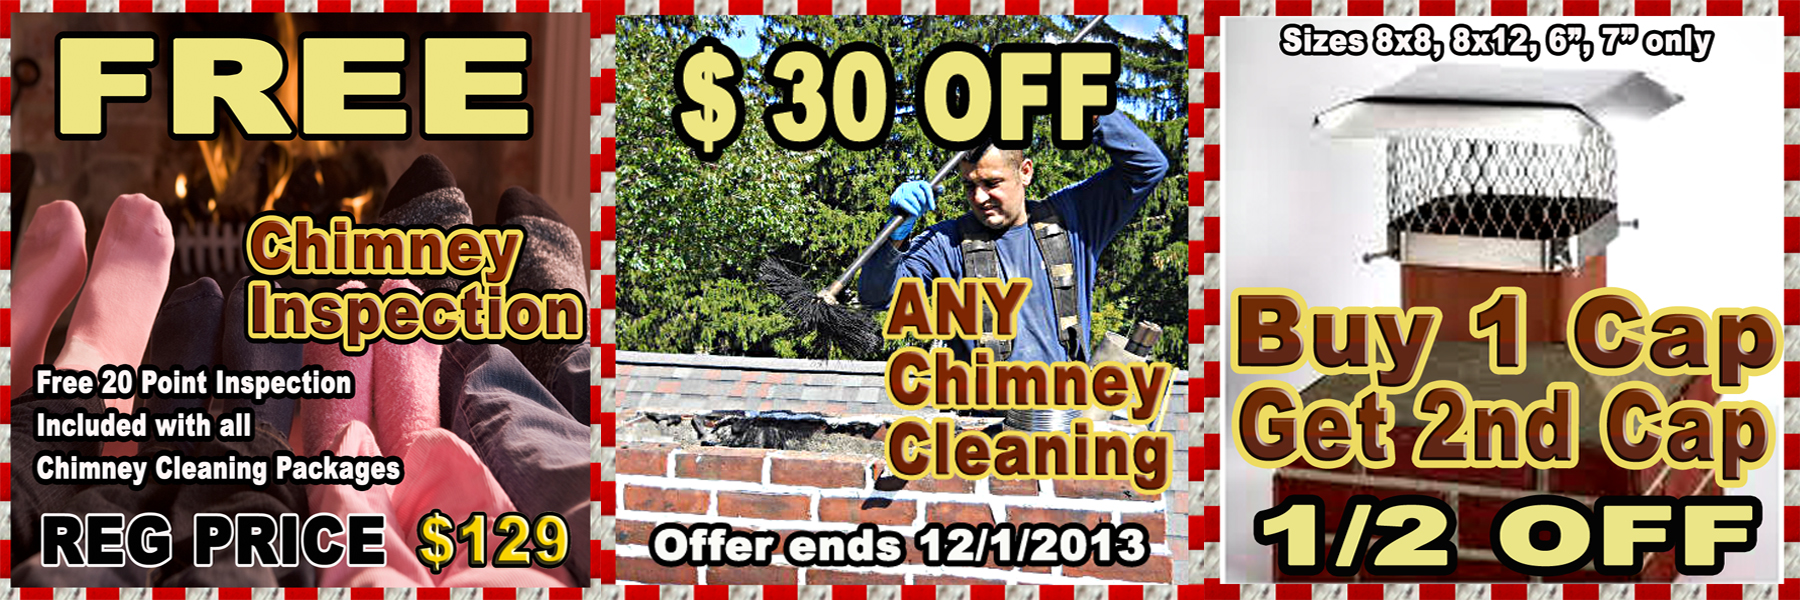 ProLine-Chimney-Cleaning-Chimney-Inspection-Chimney-Cap-Coupon